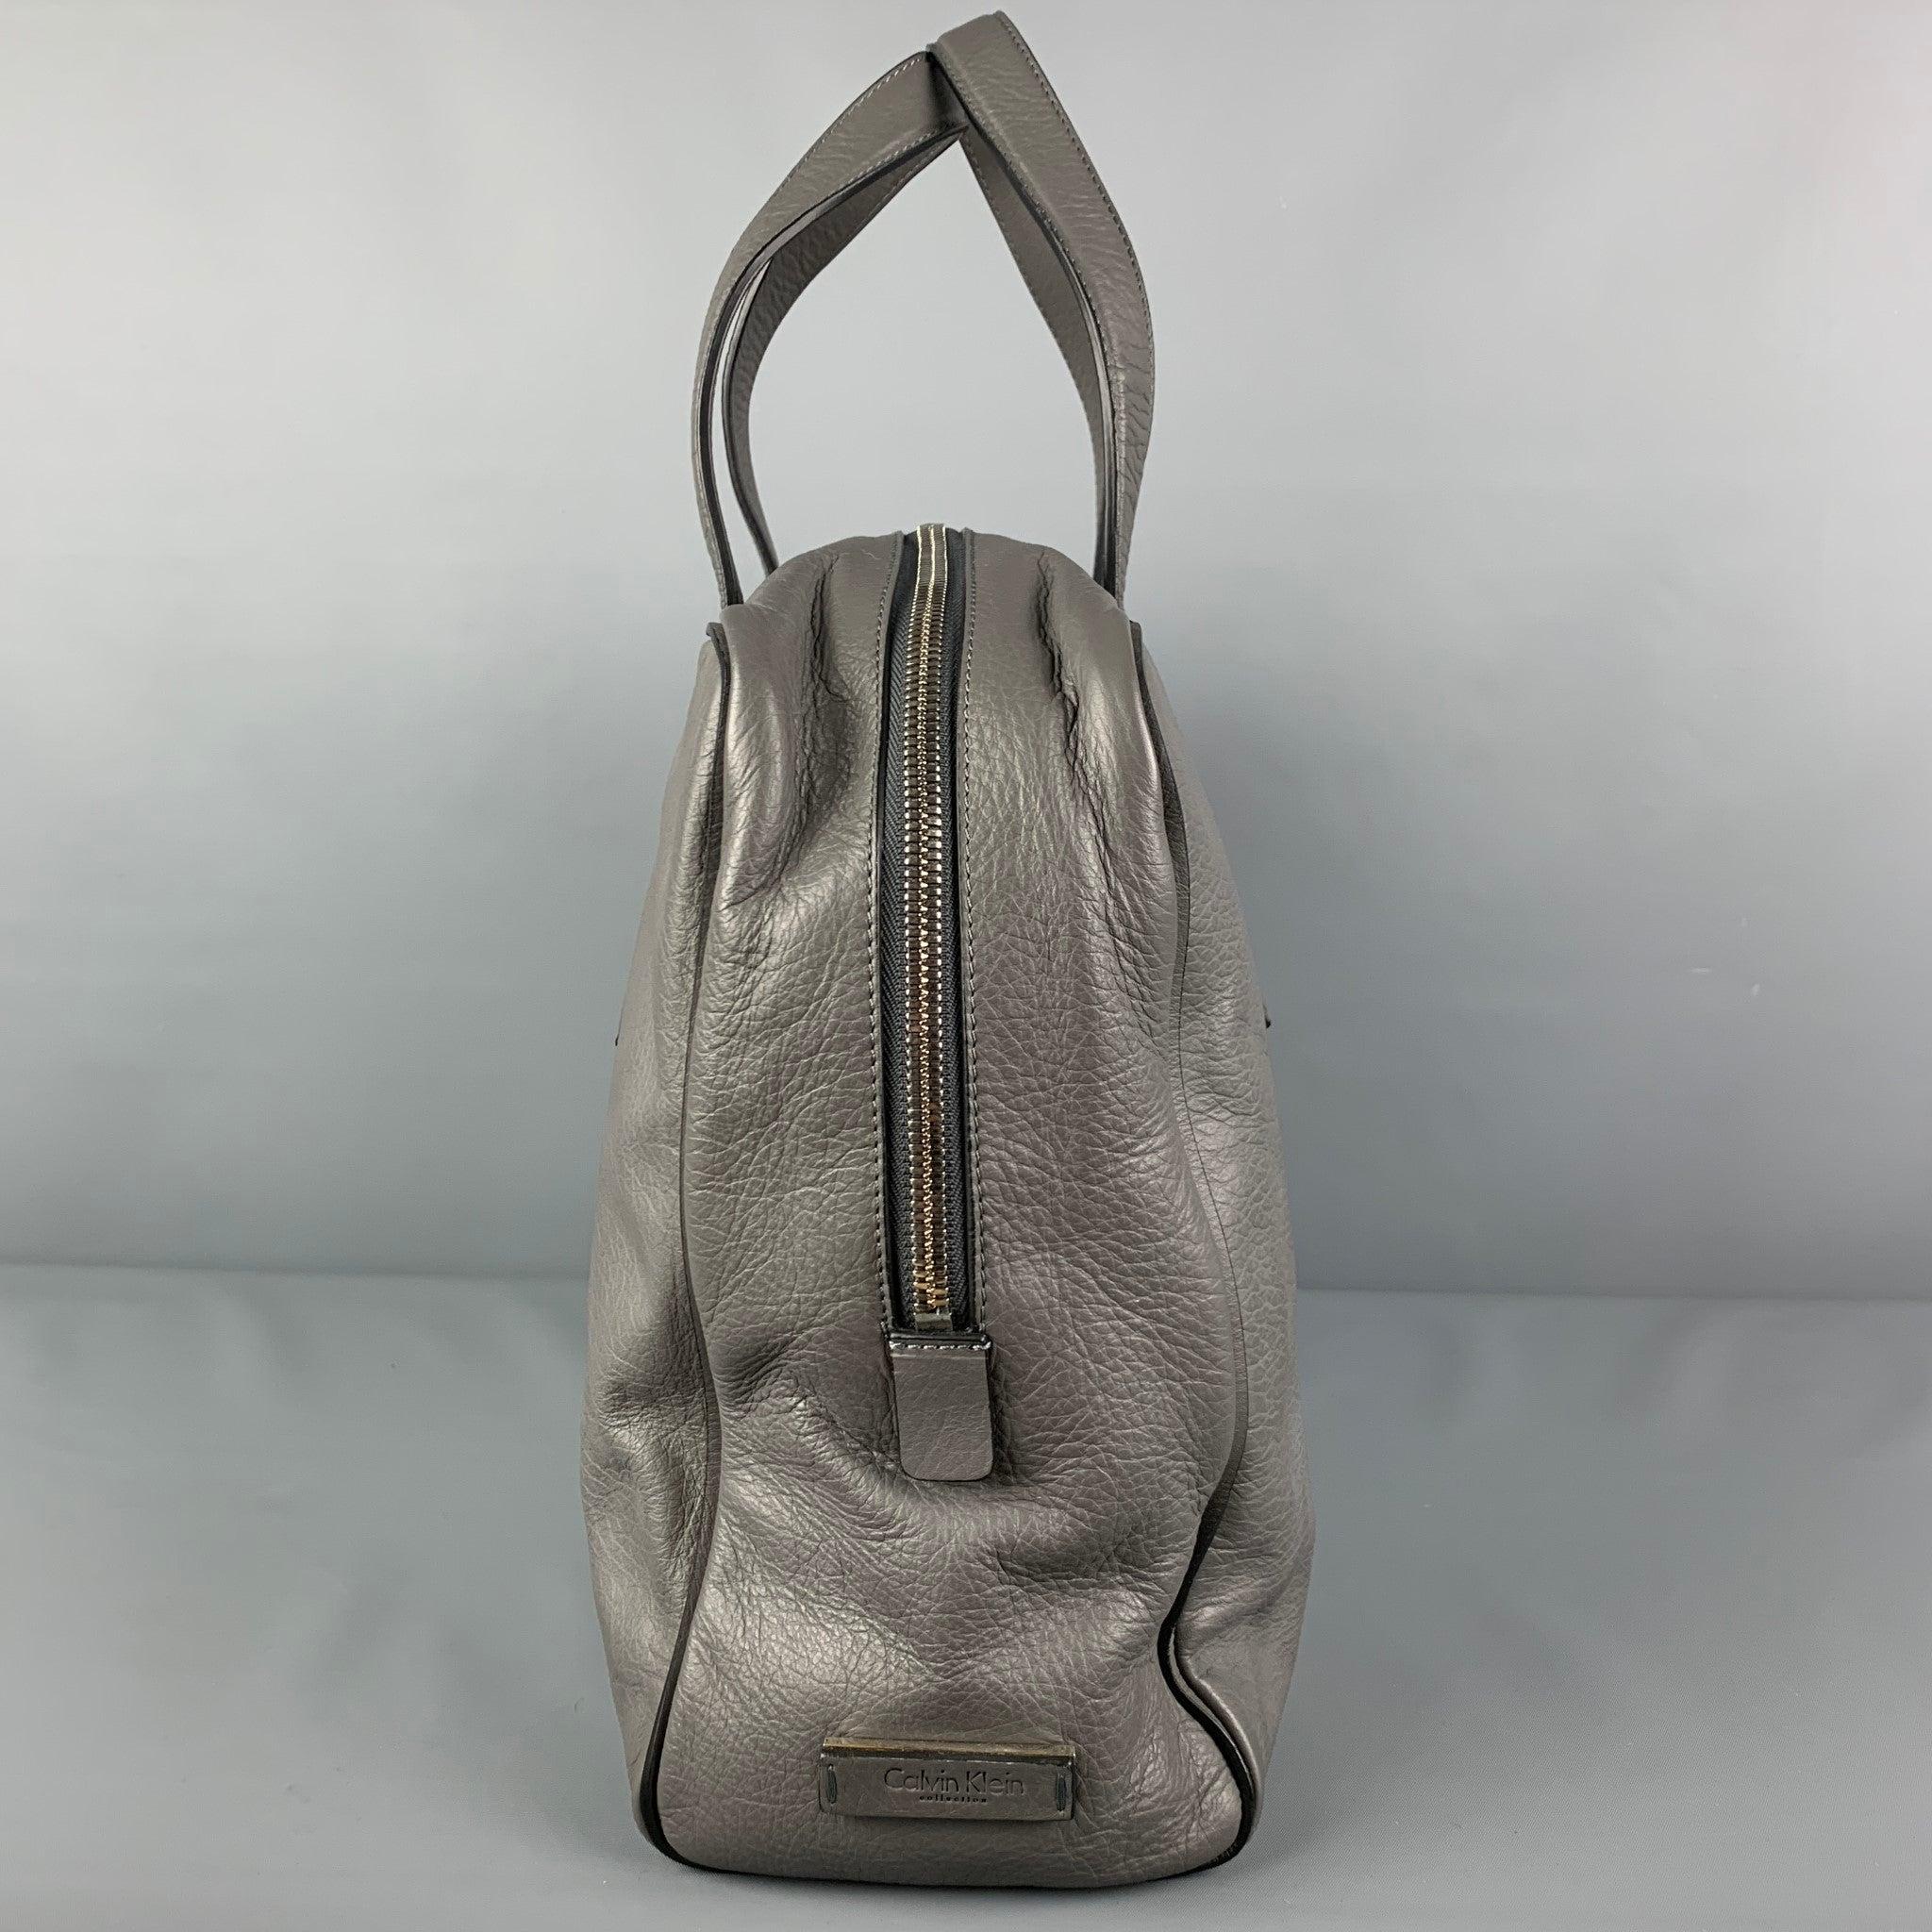 CALVIN KLEIN COLLECTION bag comes in a grey leather featuring top handles, inner slots, silver tone hardware, and a top zipper closure.
New With Tags. 

Measurements: 
  Length: 15.5 inches  Width: 4 inches  Height: 12.5 inches  Drop: 8 inches 
  
 